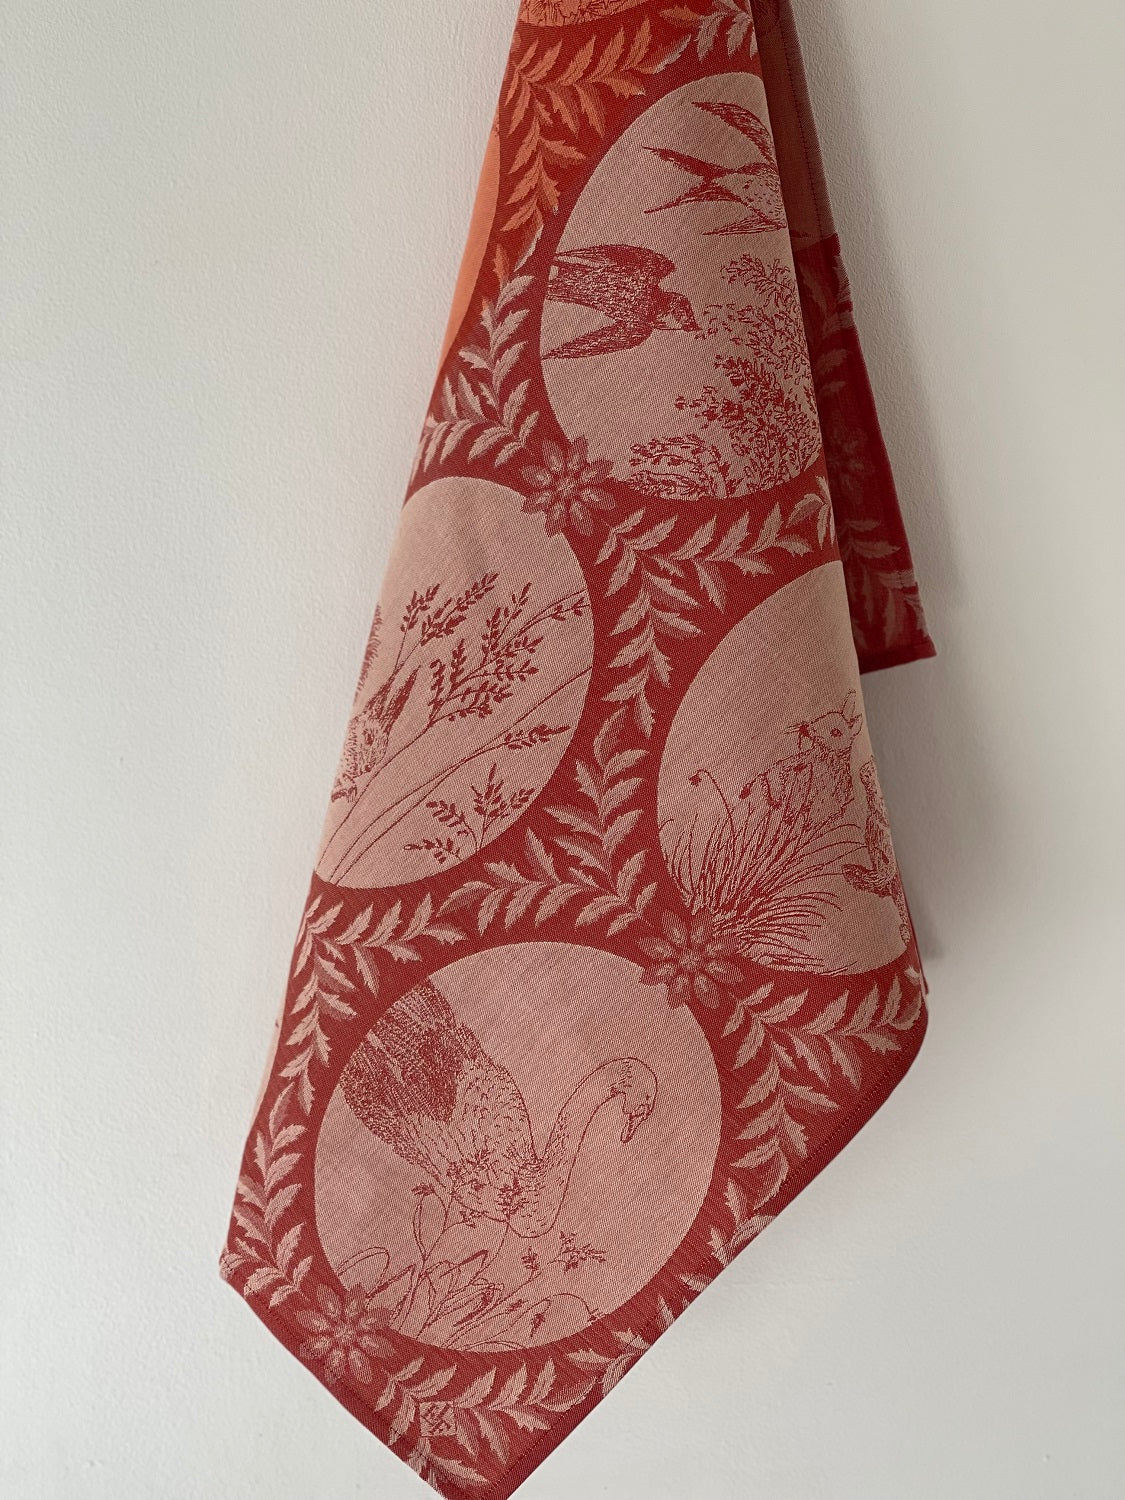 Jacquard Francais "Josephine" (Red), Woven cotton tea towel. Made in France.